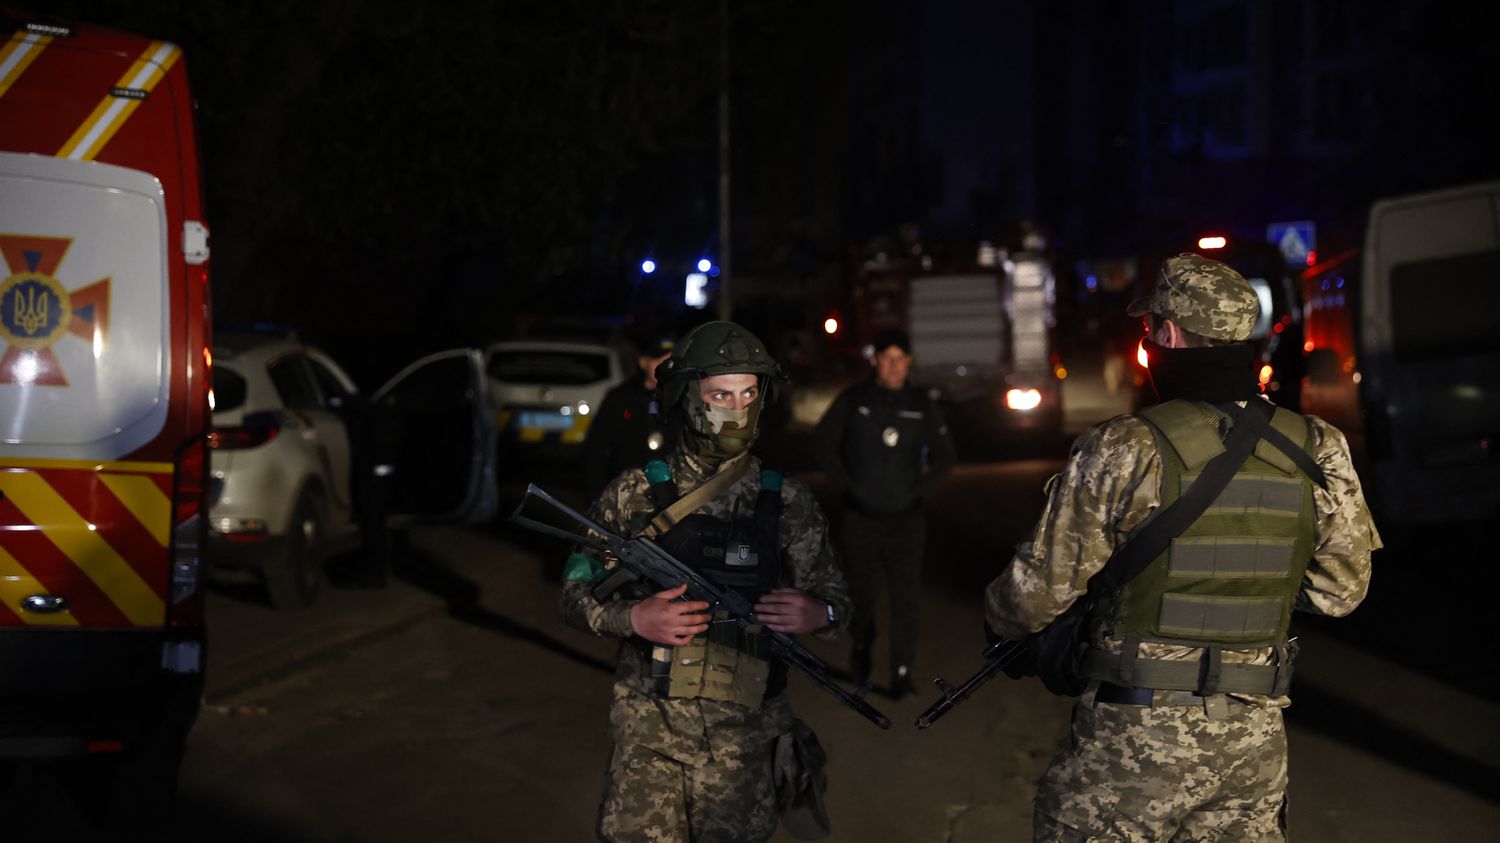 War in Ukraine: a journalist killed in the bombings that targeted kyiv on Thursday
